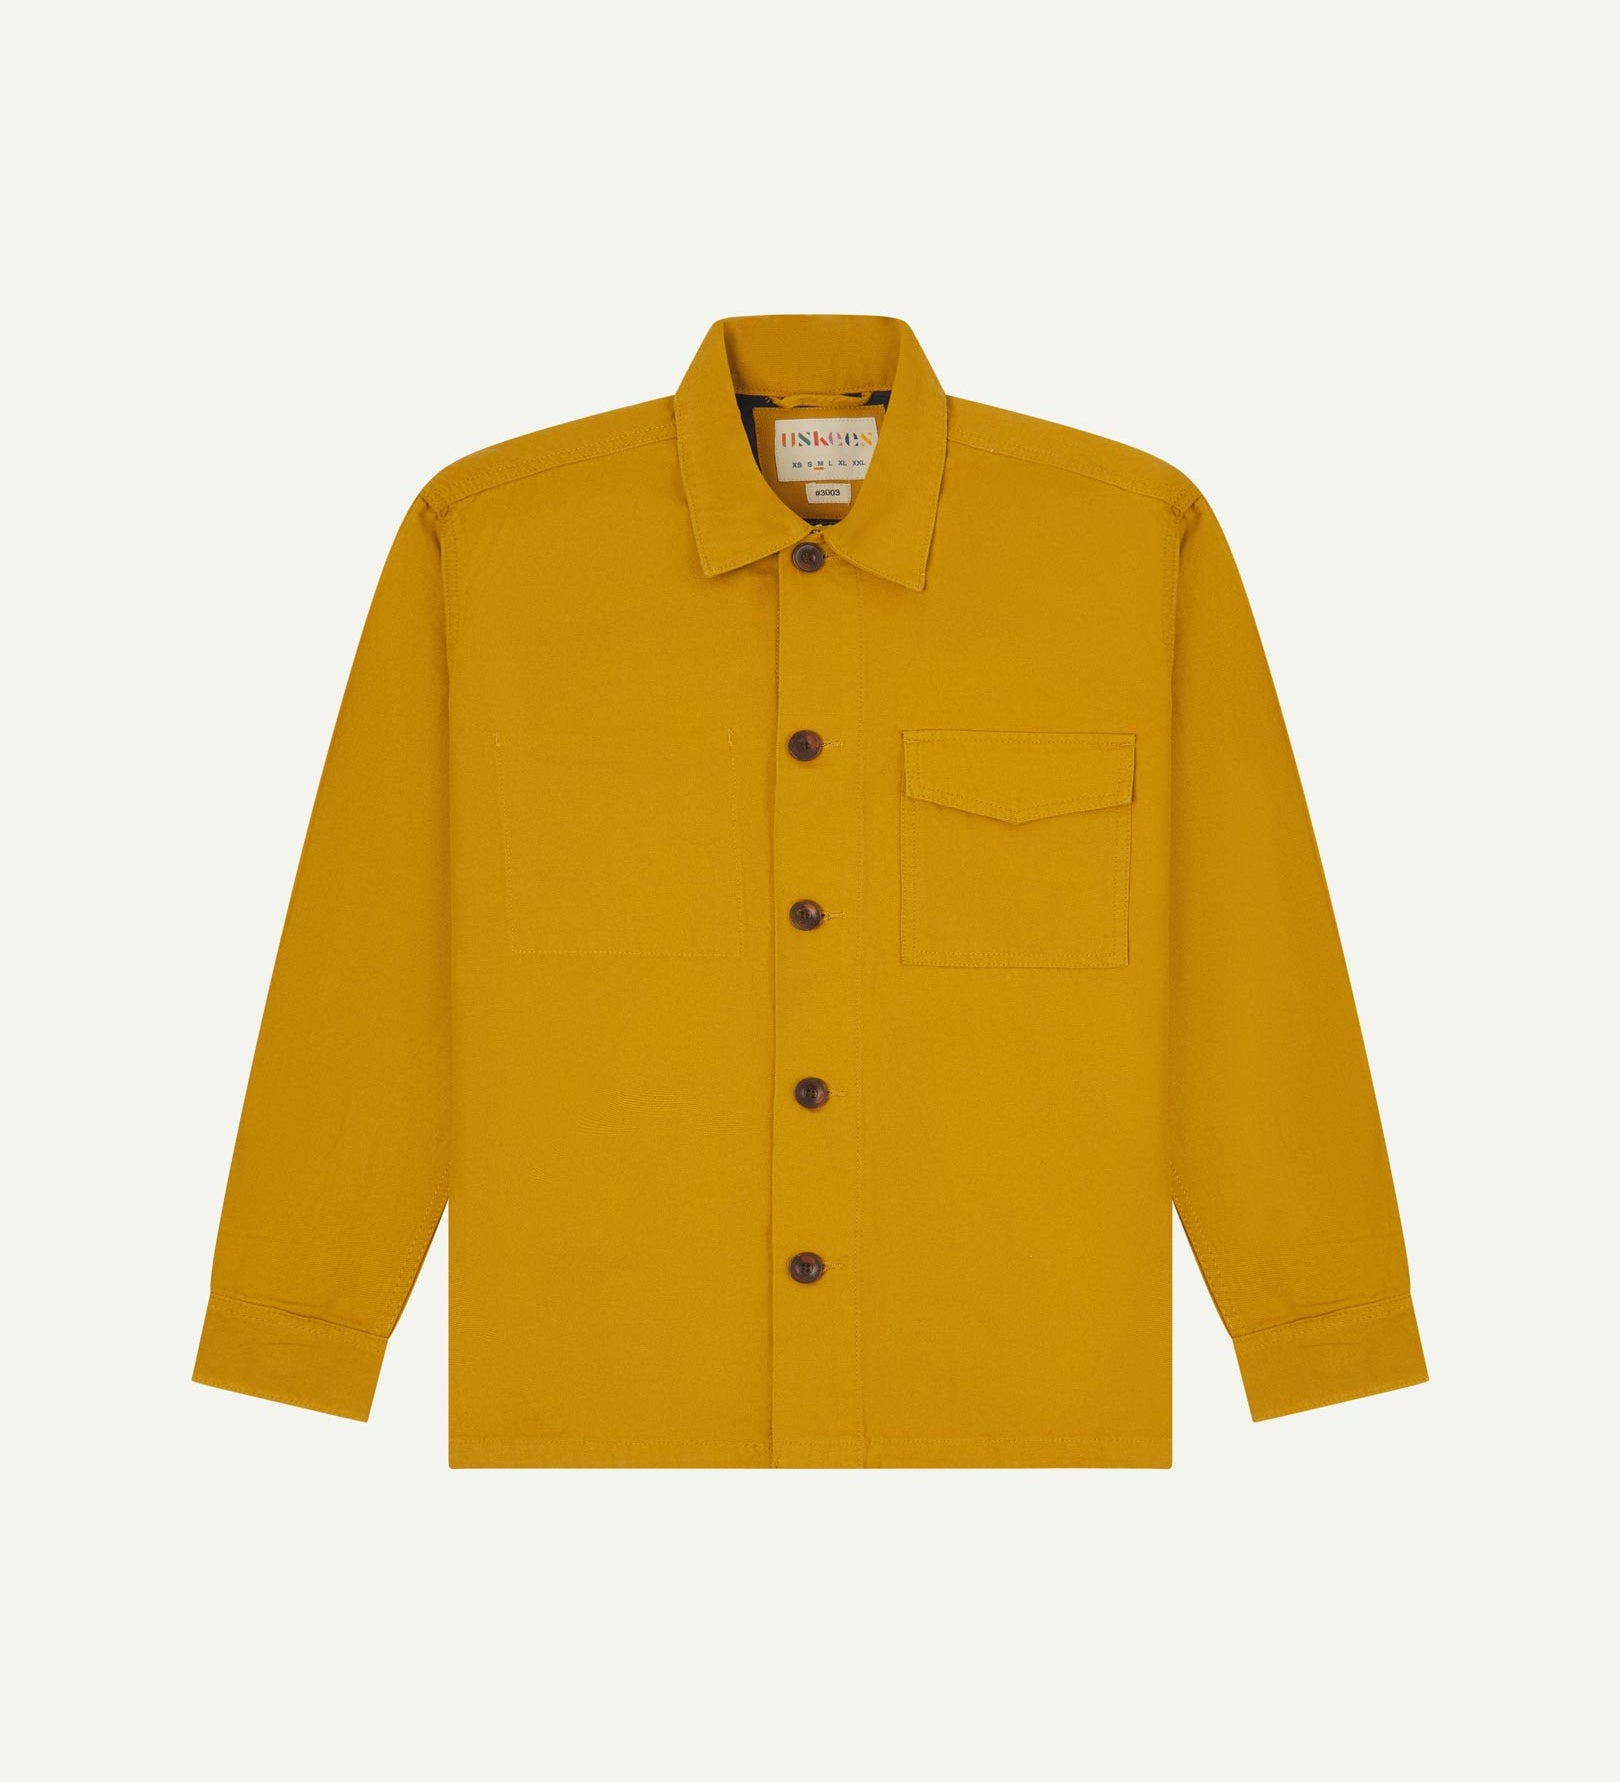 Yellow buttoned organic cotton workshirt from Uskees with clear view of chest pocket and Uskees branding label.